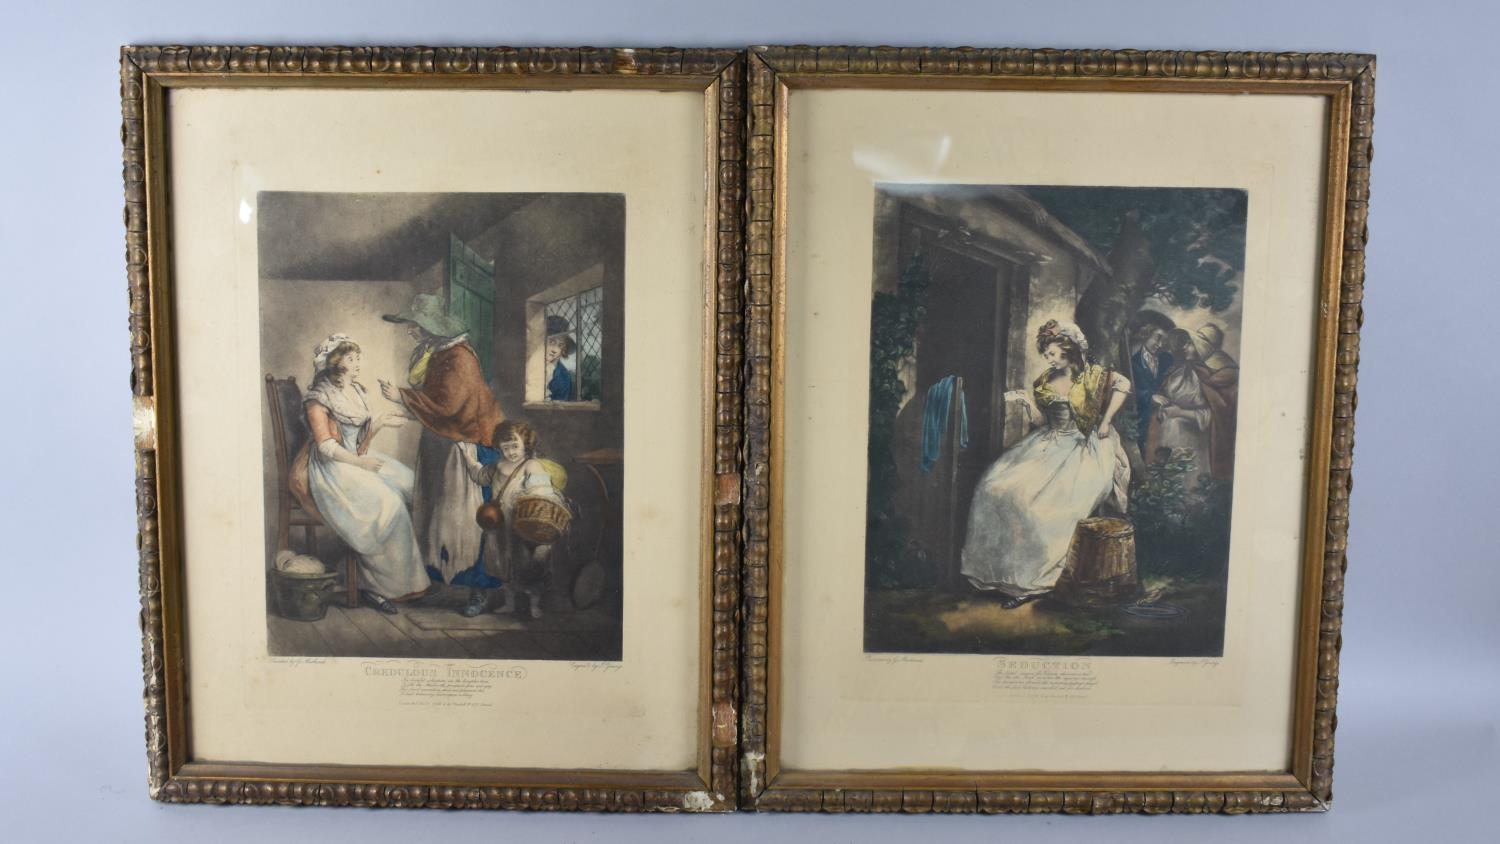 A Pair of Framed Prints of Engravings "Seduction" and "Credulous Innocence" by George Morland,